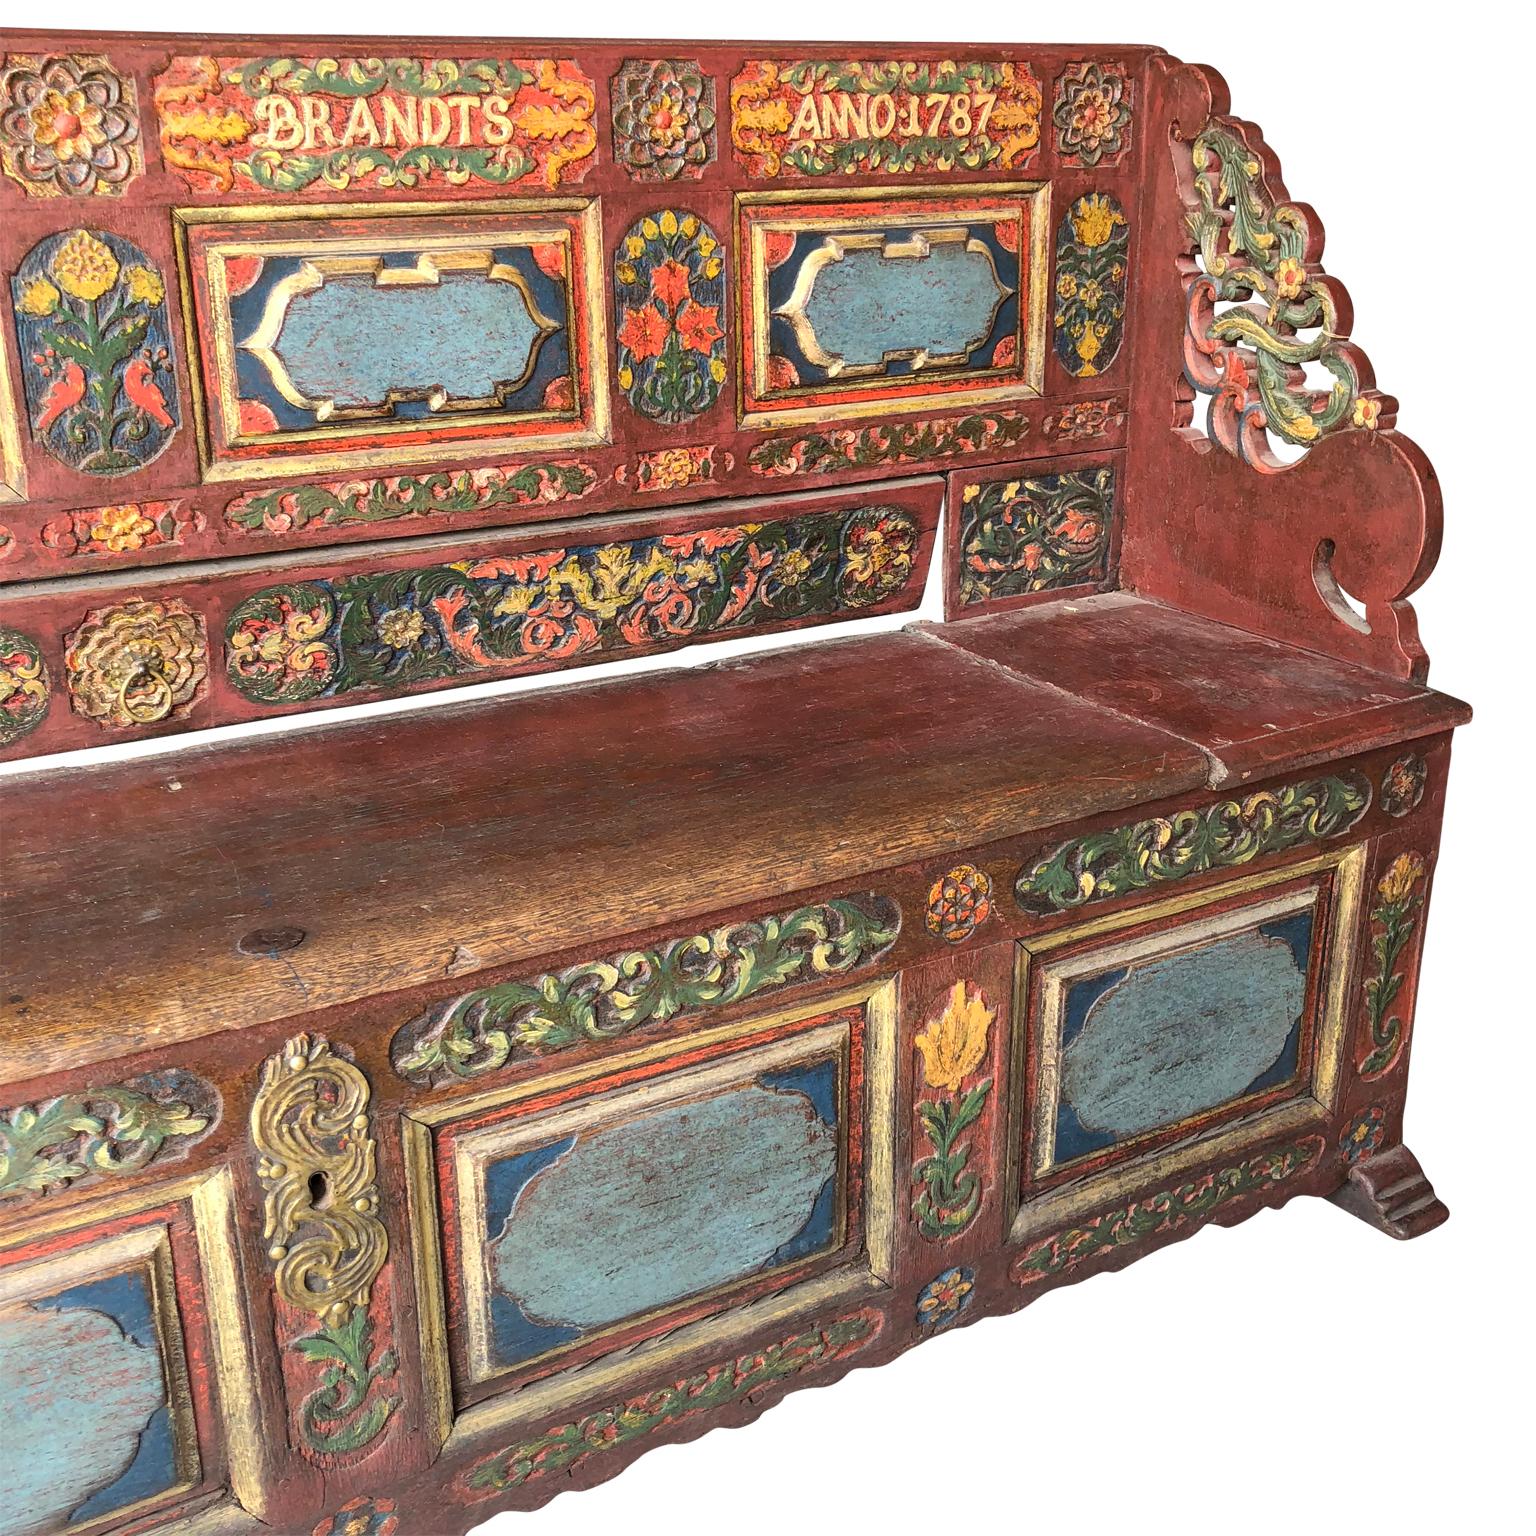 Scandinavian 18th century carved and painted Folk bench, Anno, 1787.
The Folk Art bench is probably Danish and made in connection the engagement or marriage ceremony. Carved into the bench is the name of the wife to be; 